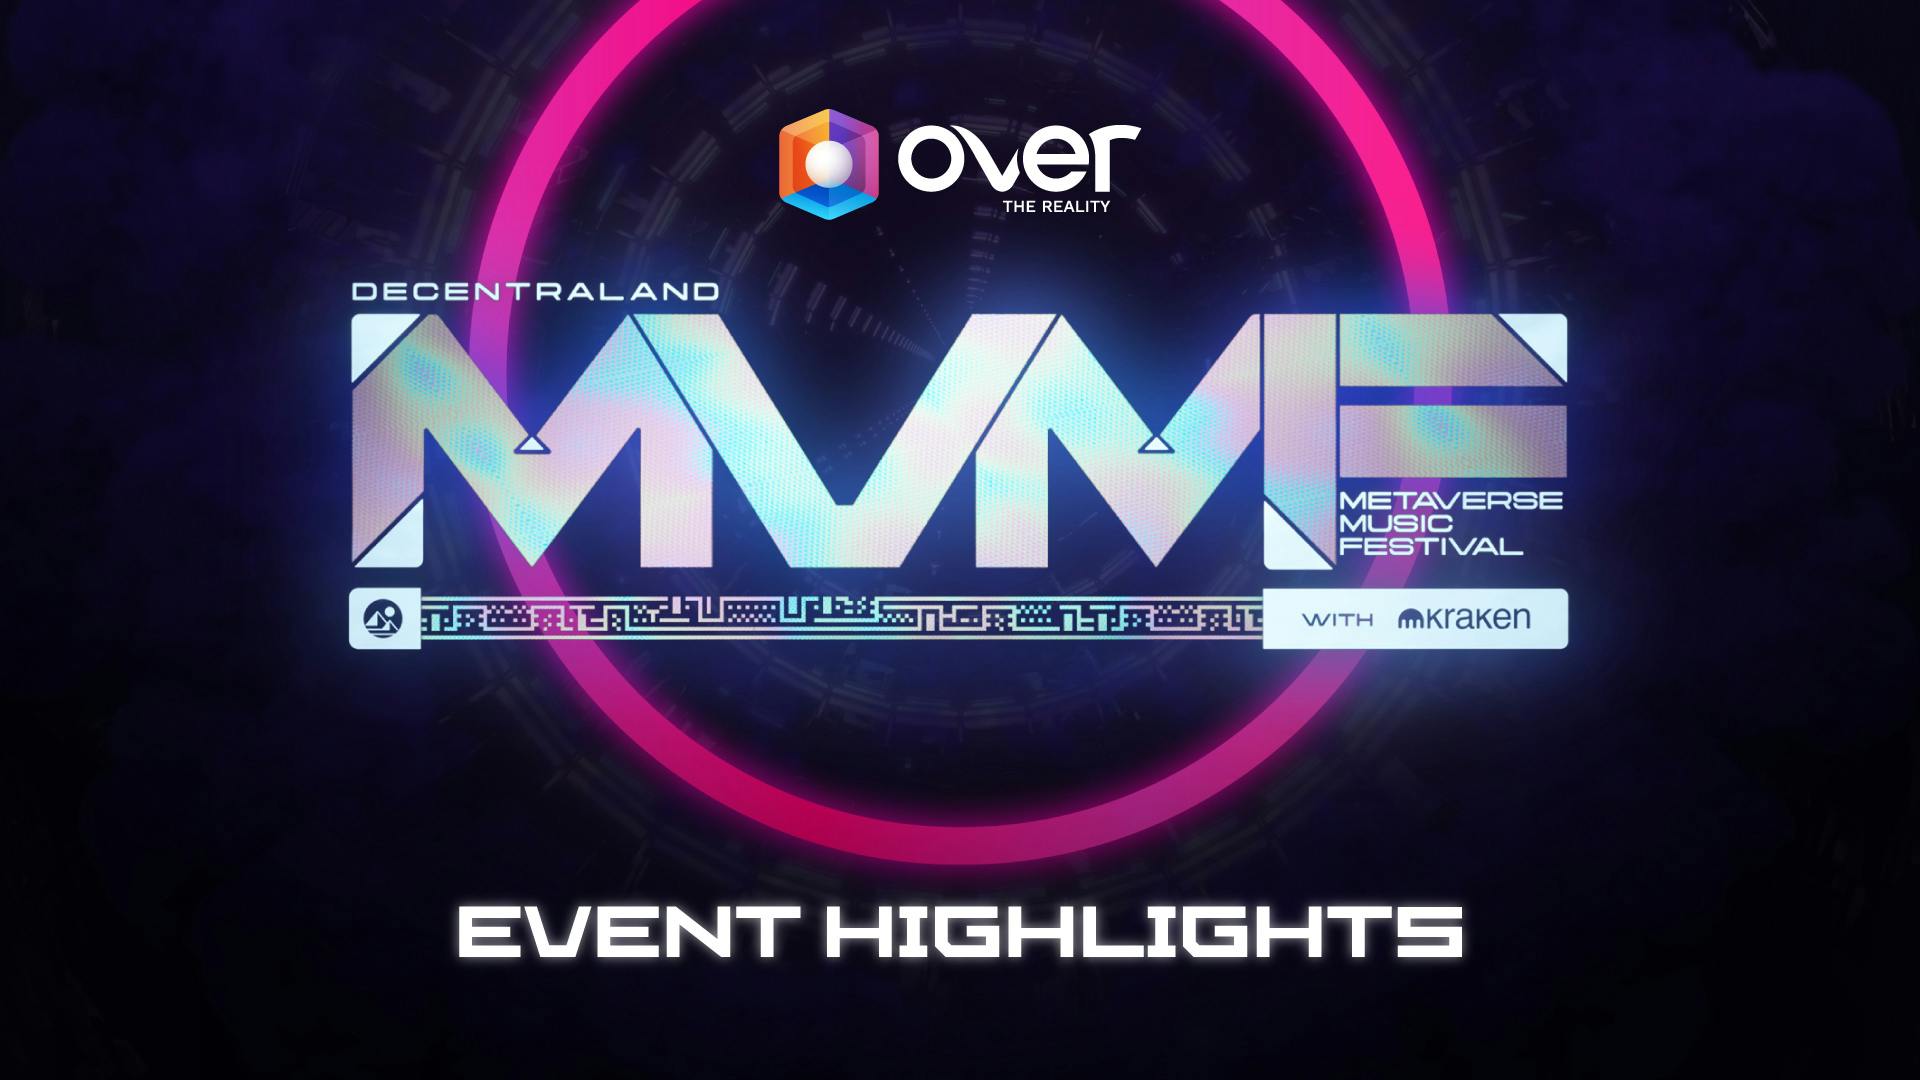 Record Numbers for Decentraland Metaverse Music Festival 2022 on OVER